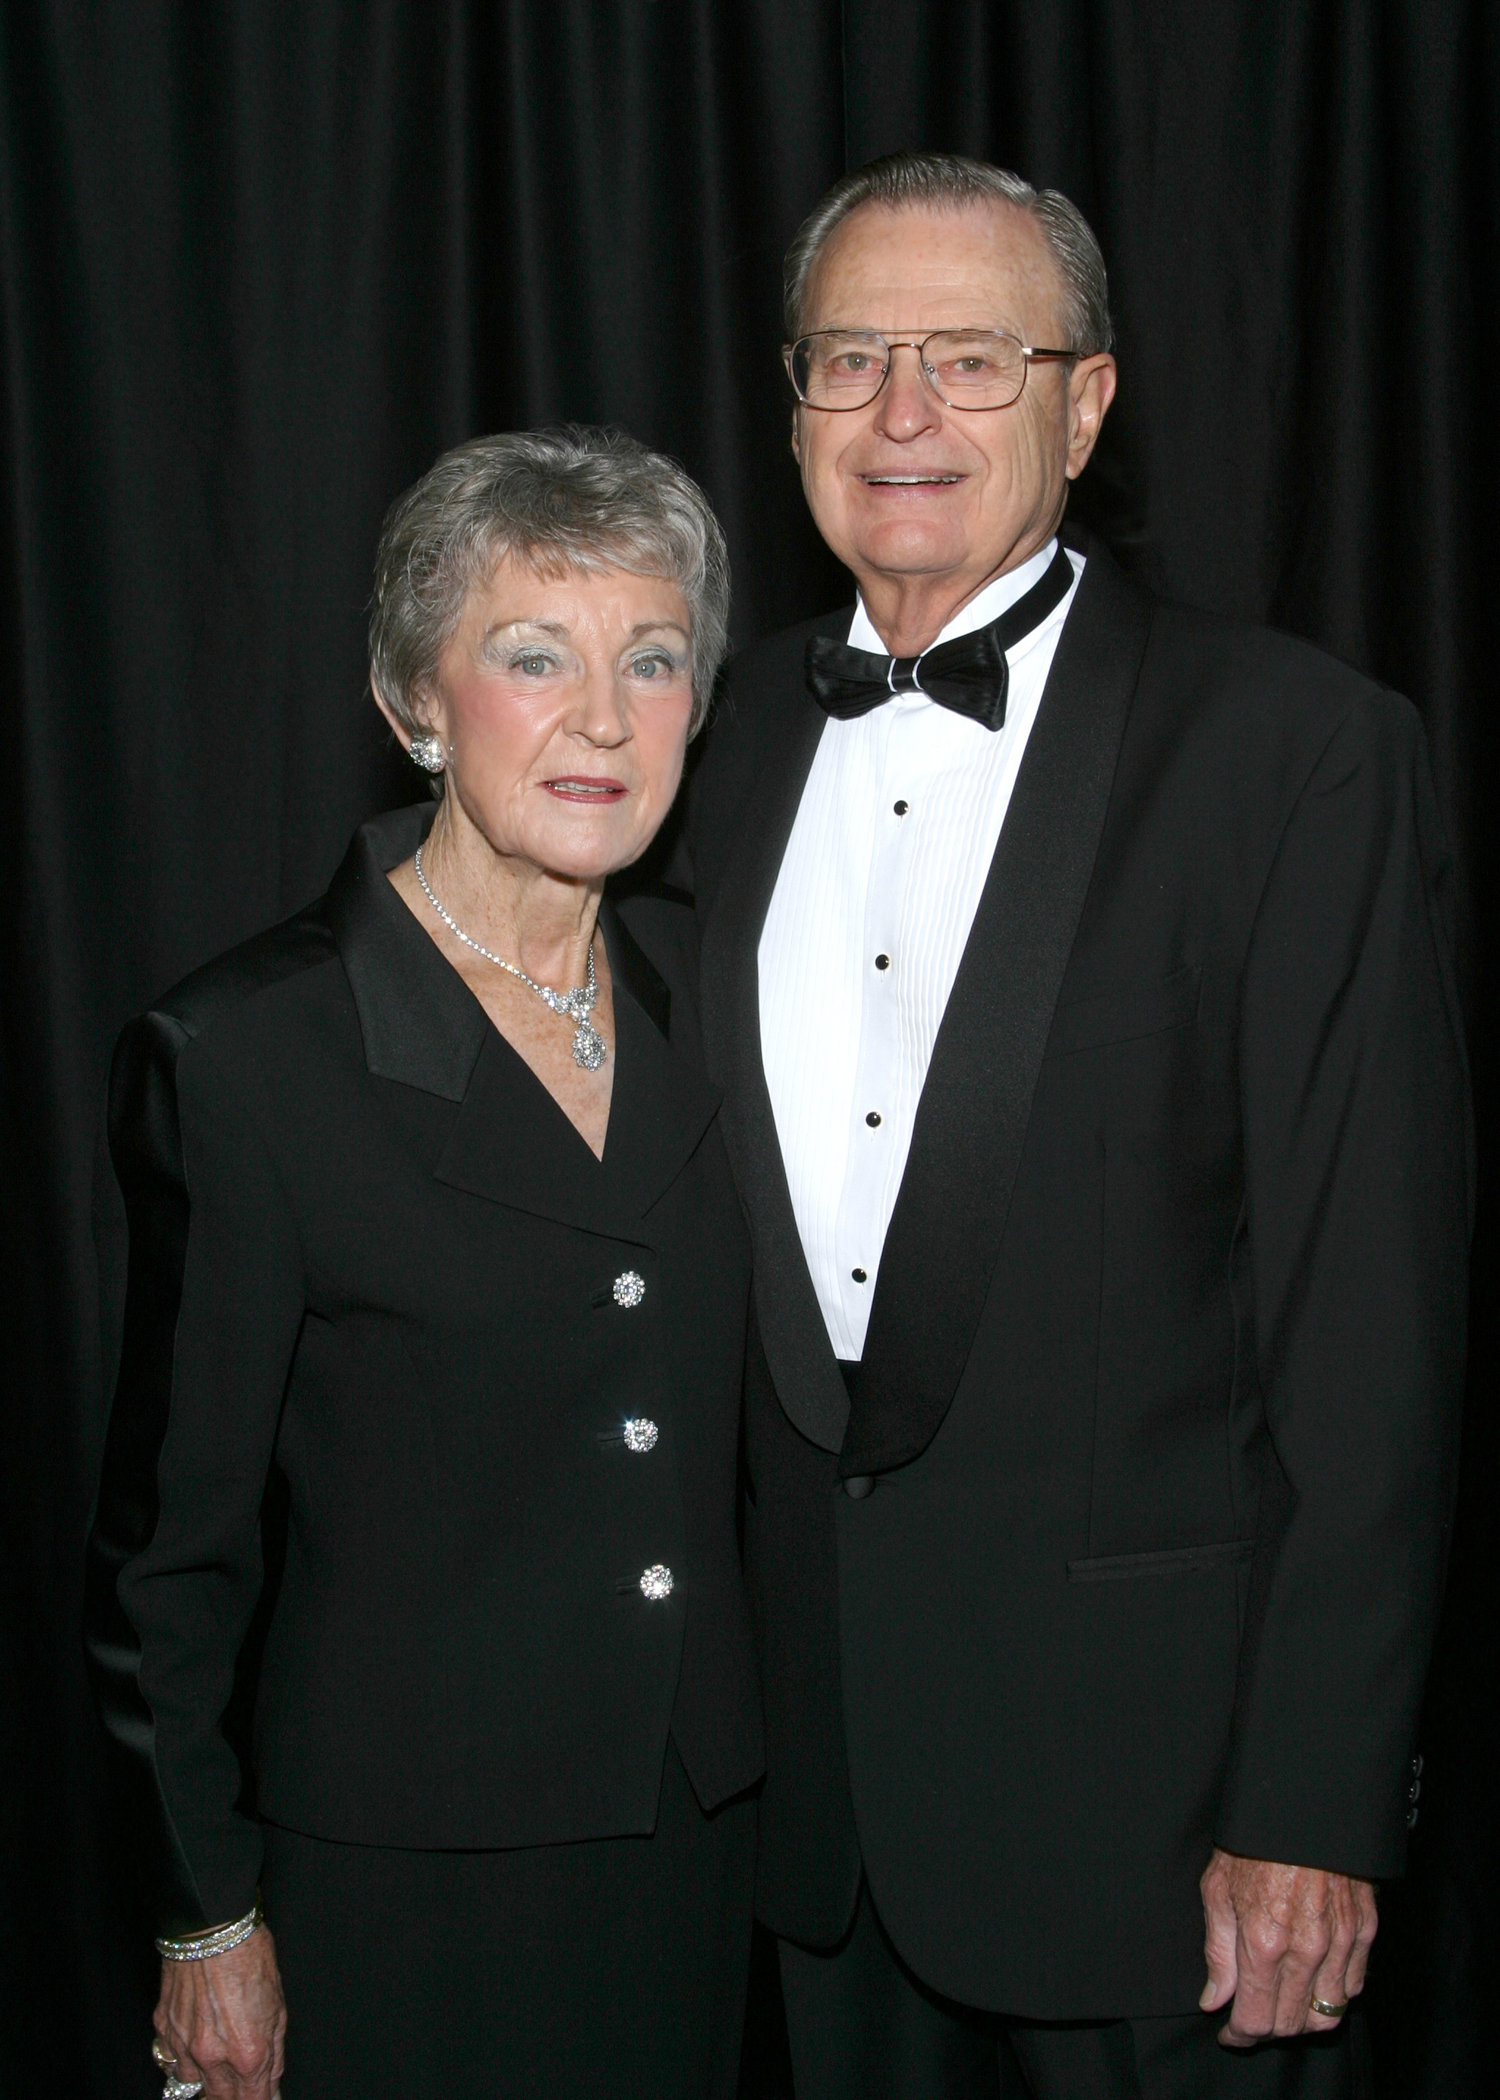 Jan and Bud Richter in formal attire